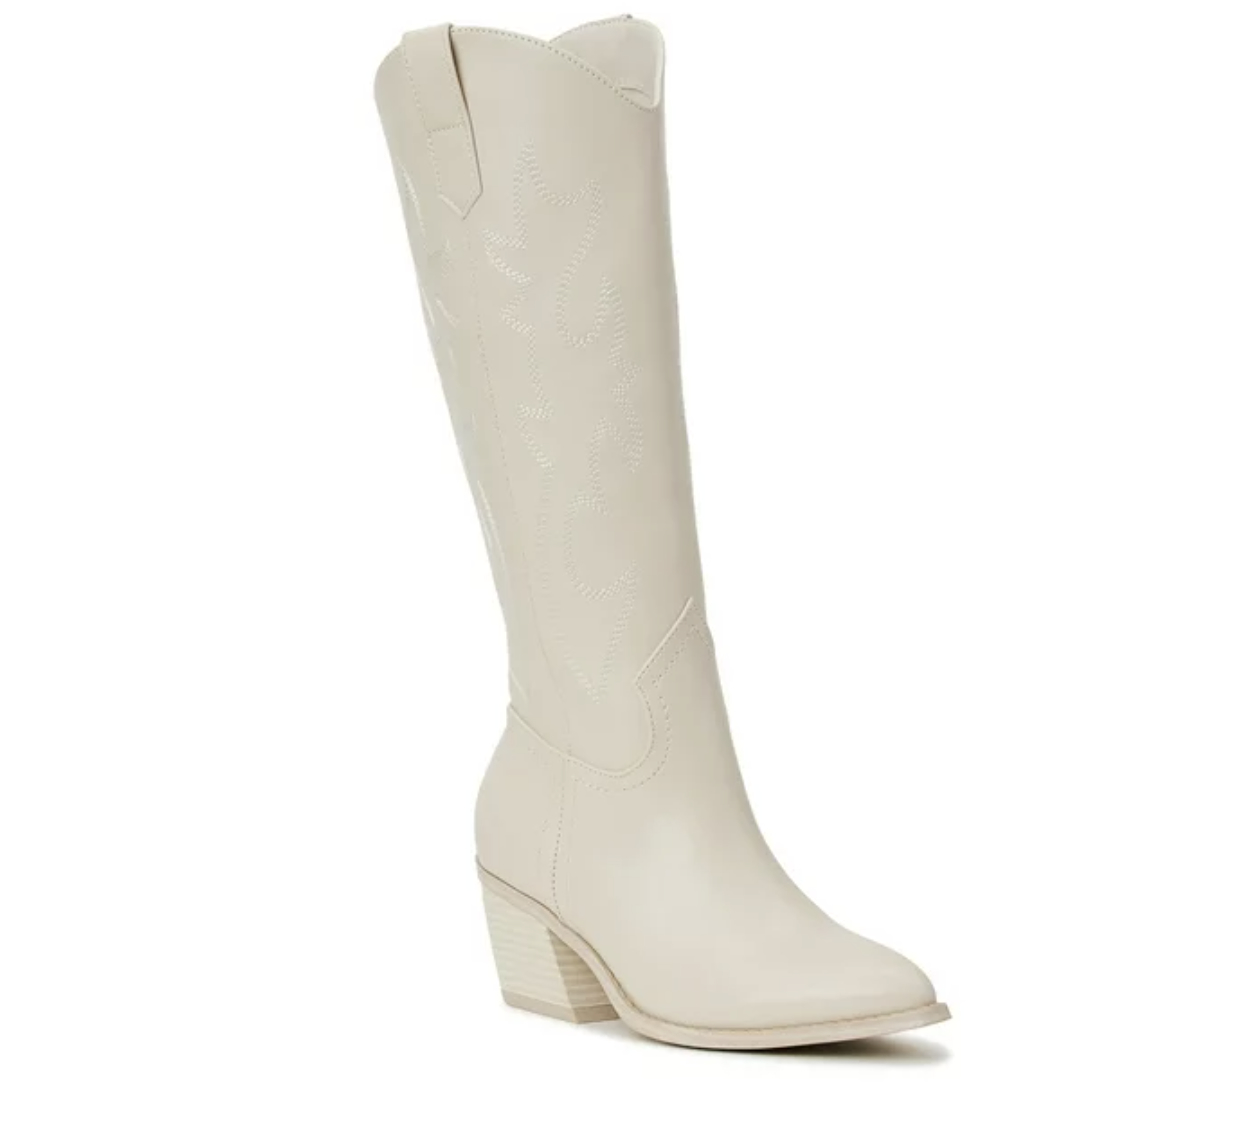 A tall white western boot